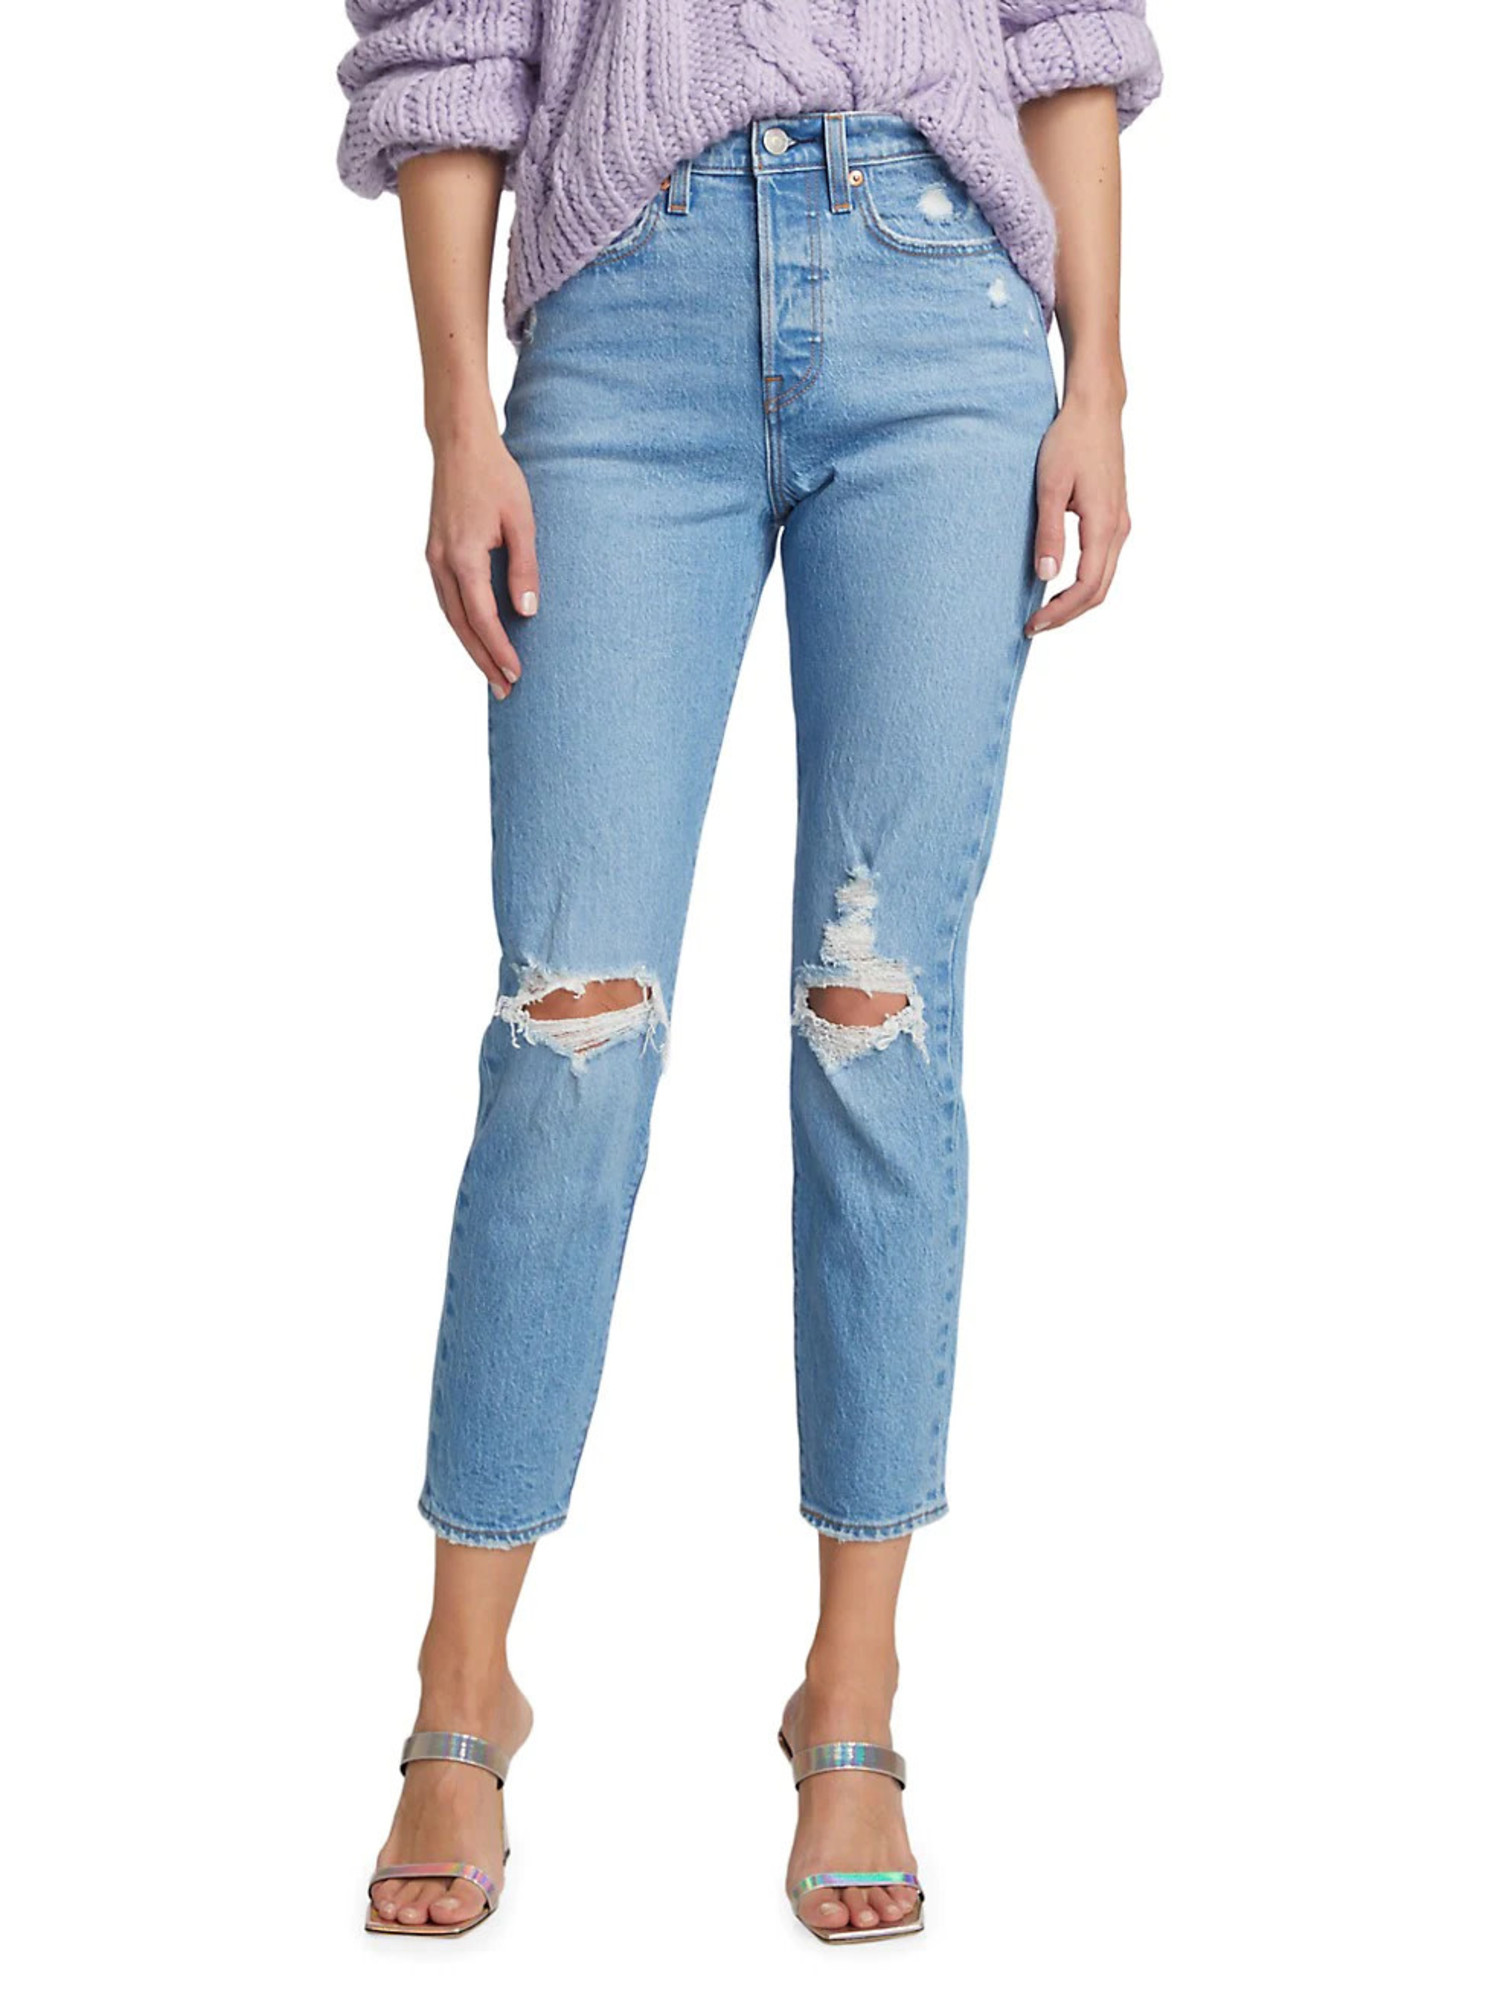 Levi's Denim | Wedgie Icon Fit - Jazz Devoted - Tryst Boutique